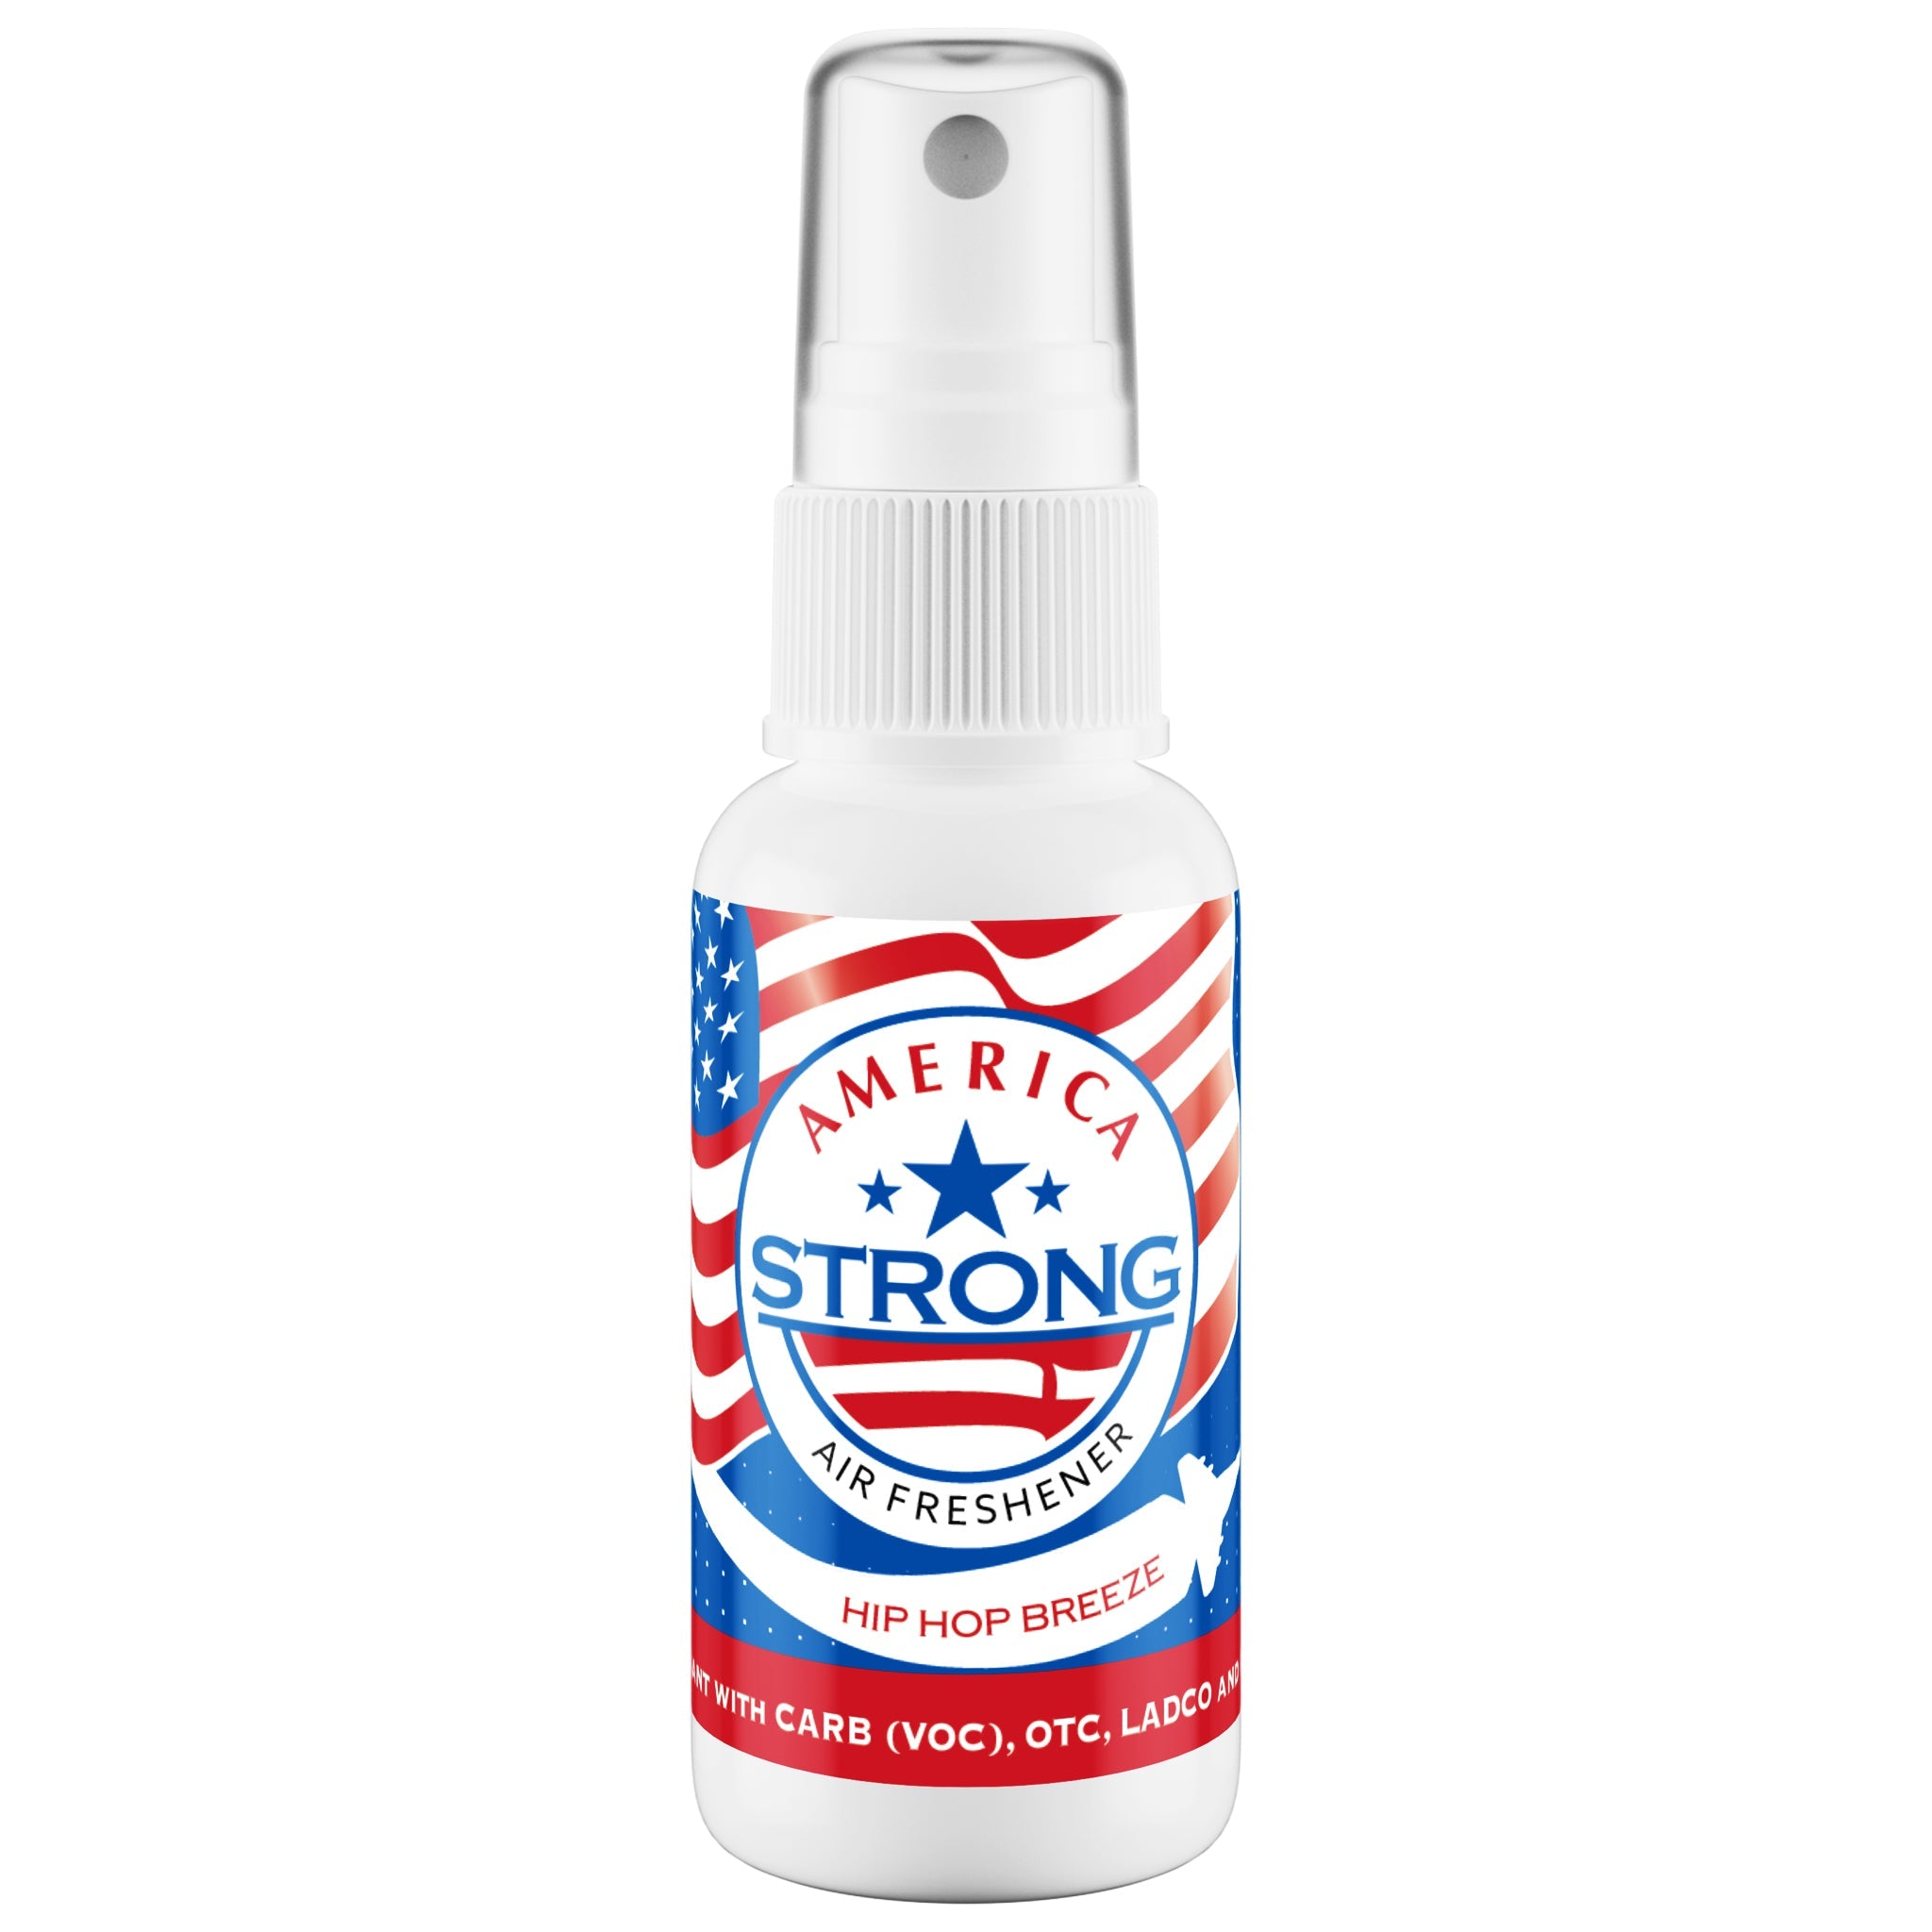 America Strong Air Freshener - Hip Hop Breeze Scent